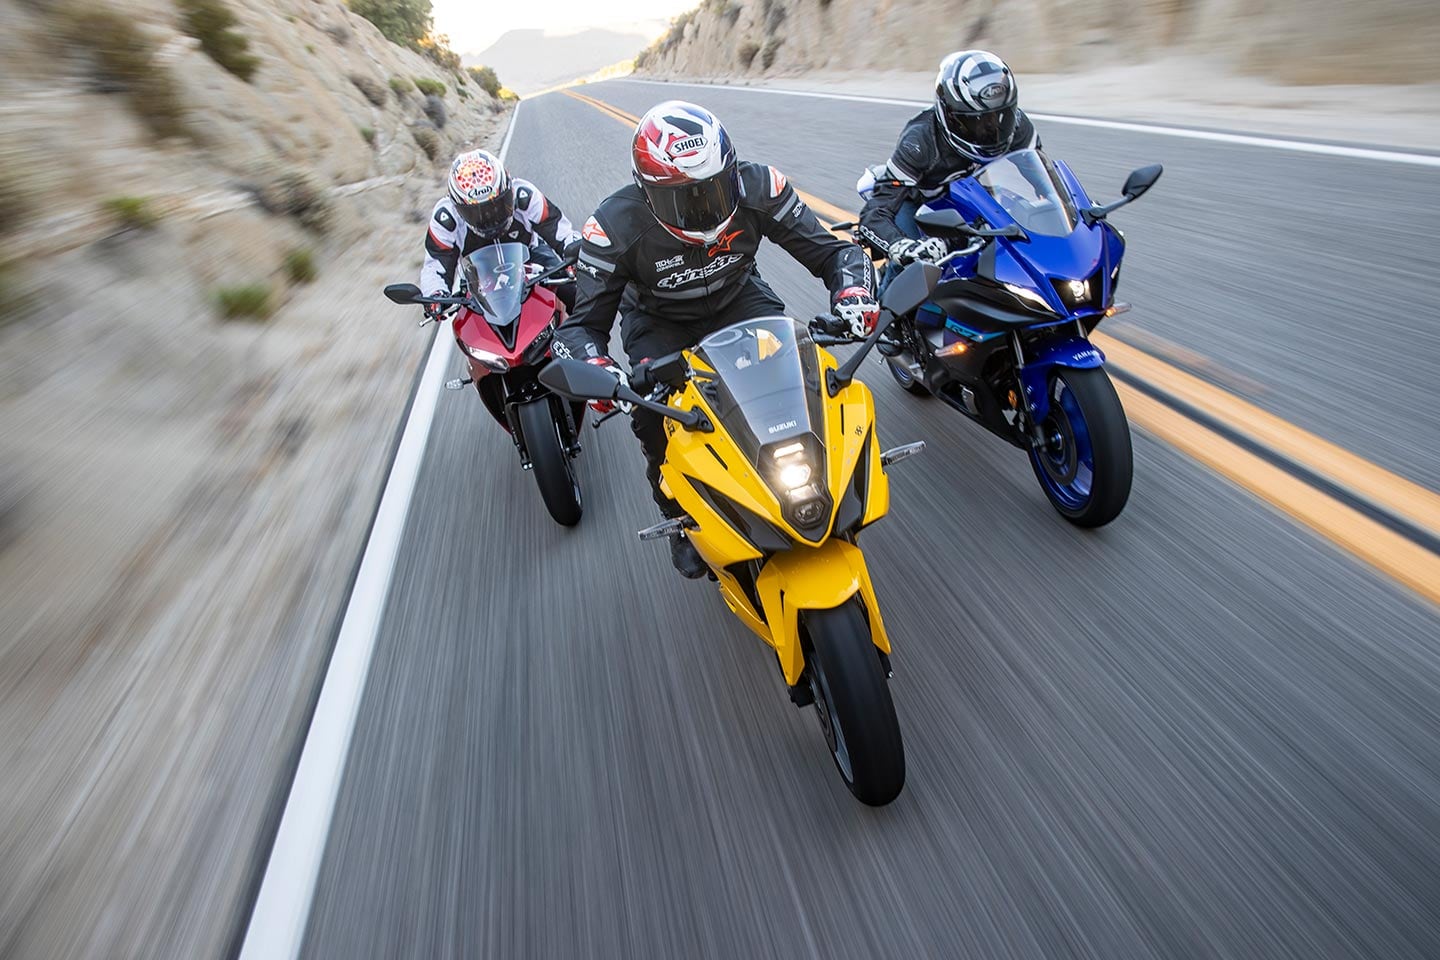 All three of these modern middleweight sportbikes have prices that are just past the $9,000 mark.